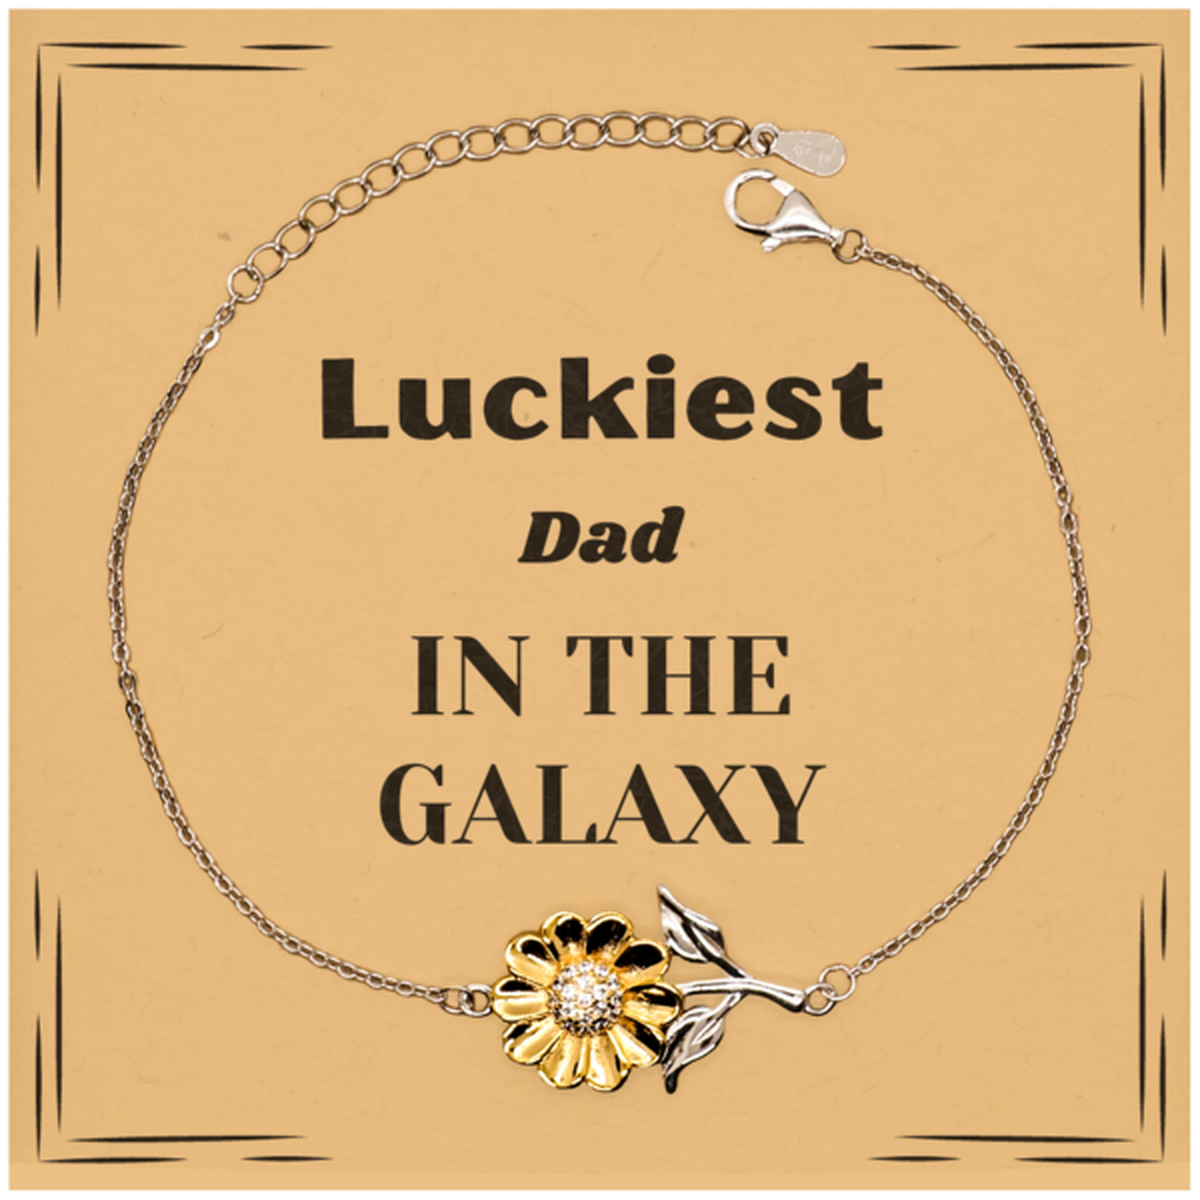 Luckiest Dad in the Galaxy, To My Dad Message Card Gifts, Christmas Dad Sunflower Bracelet Gifts, X-mas Birthday Unique Gifts For Dad Men Women